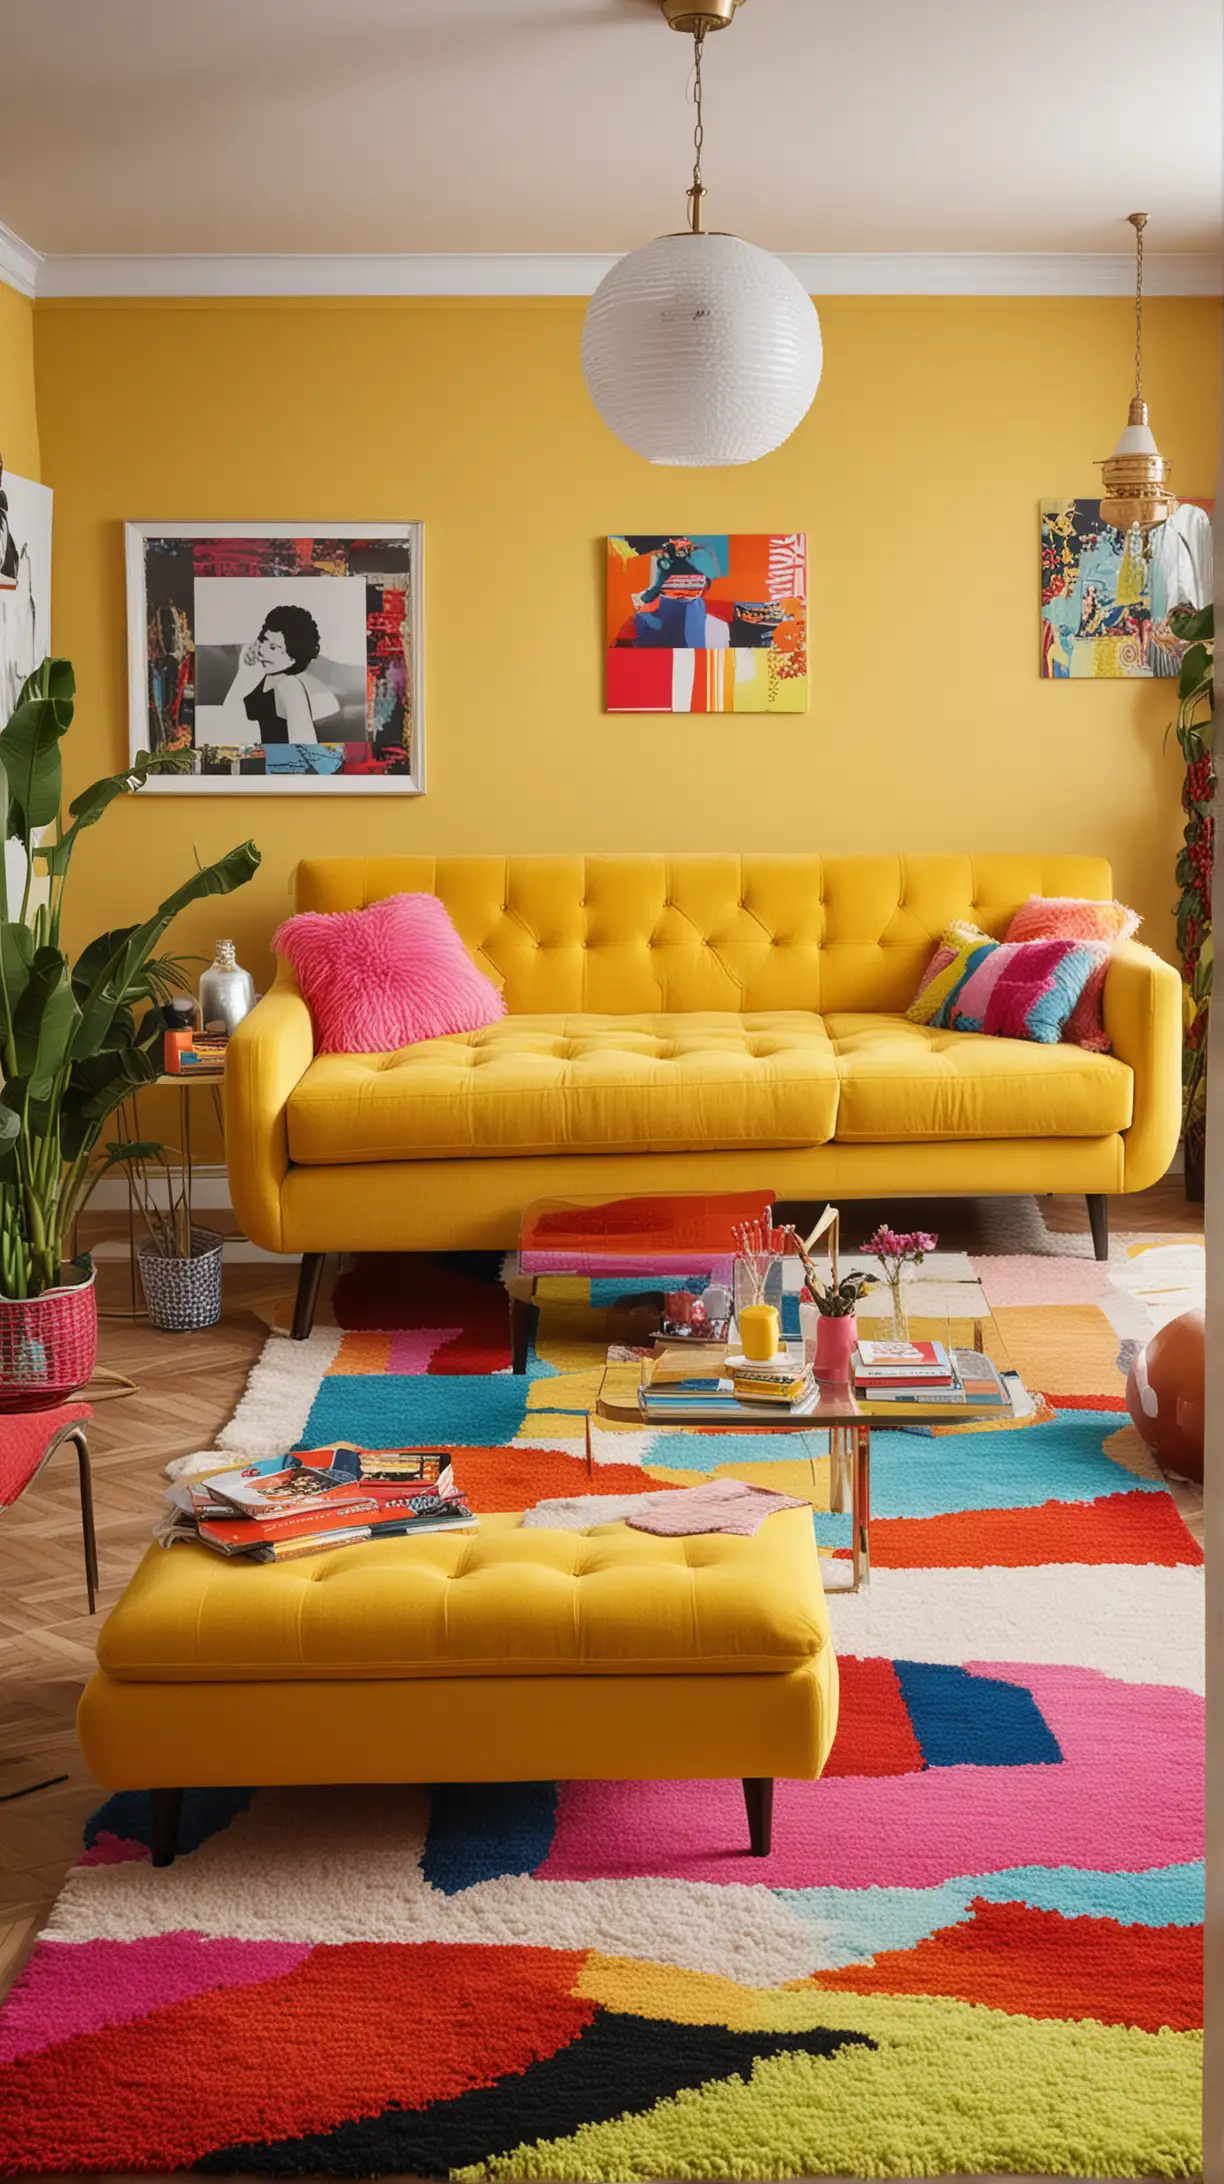 A retro-inspired living room with a bright yellow couch, colorful pop art, shag rugs, and funky lighting. Capture a vibrant, nostalgic atmosphere.